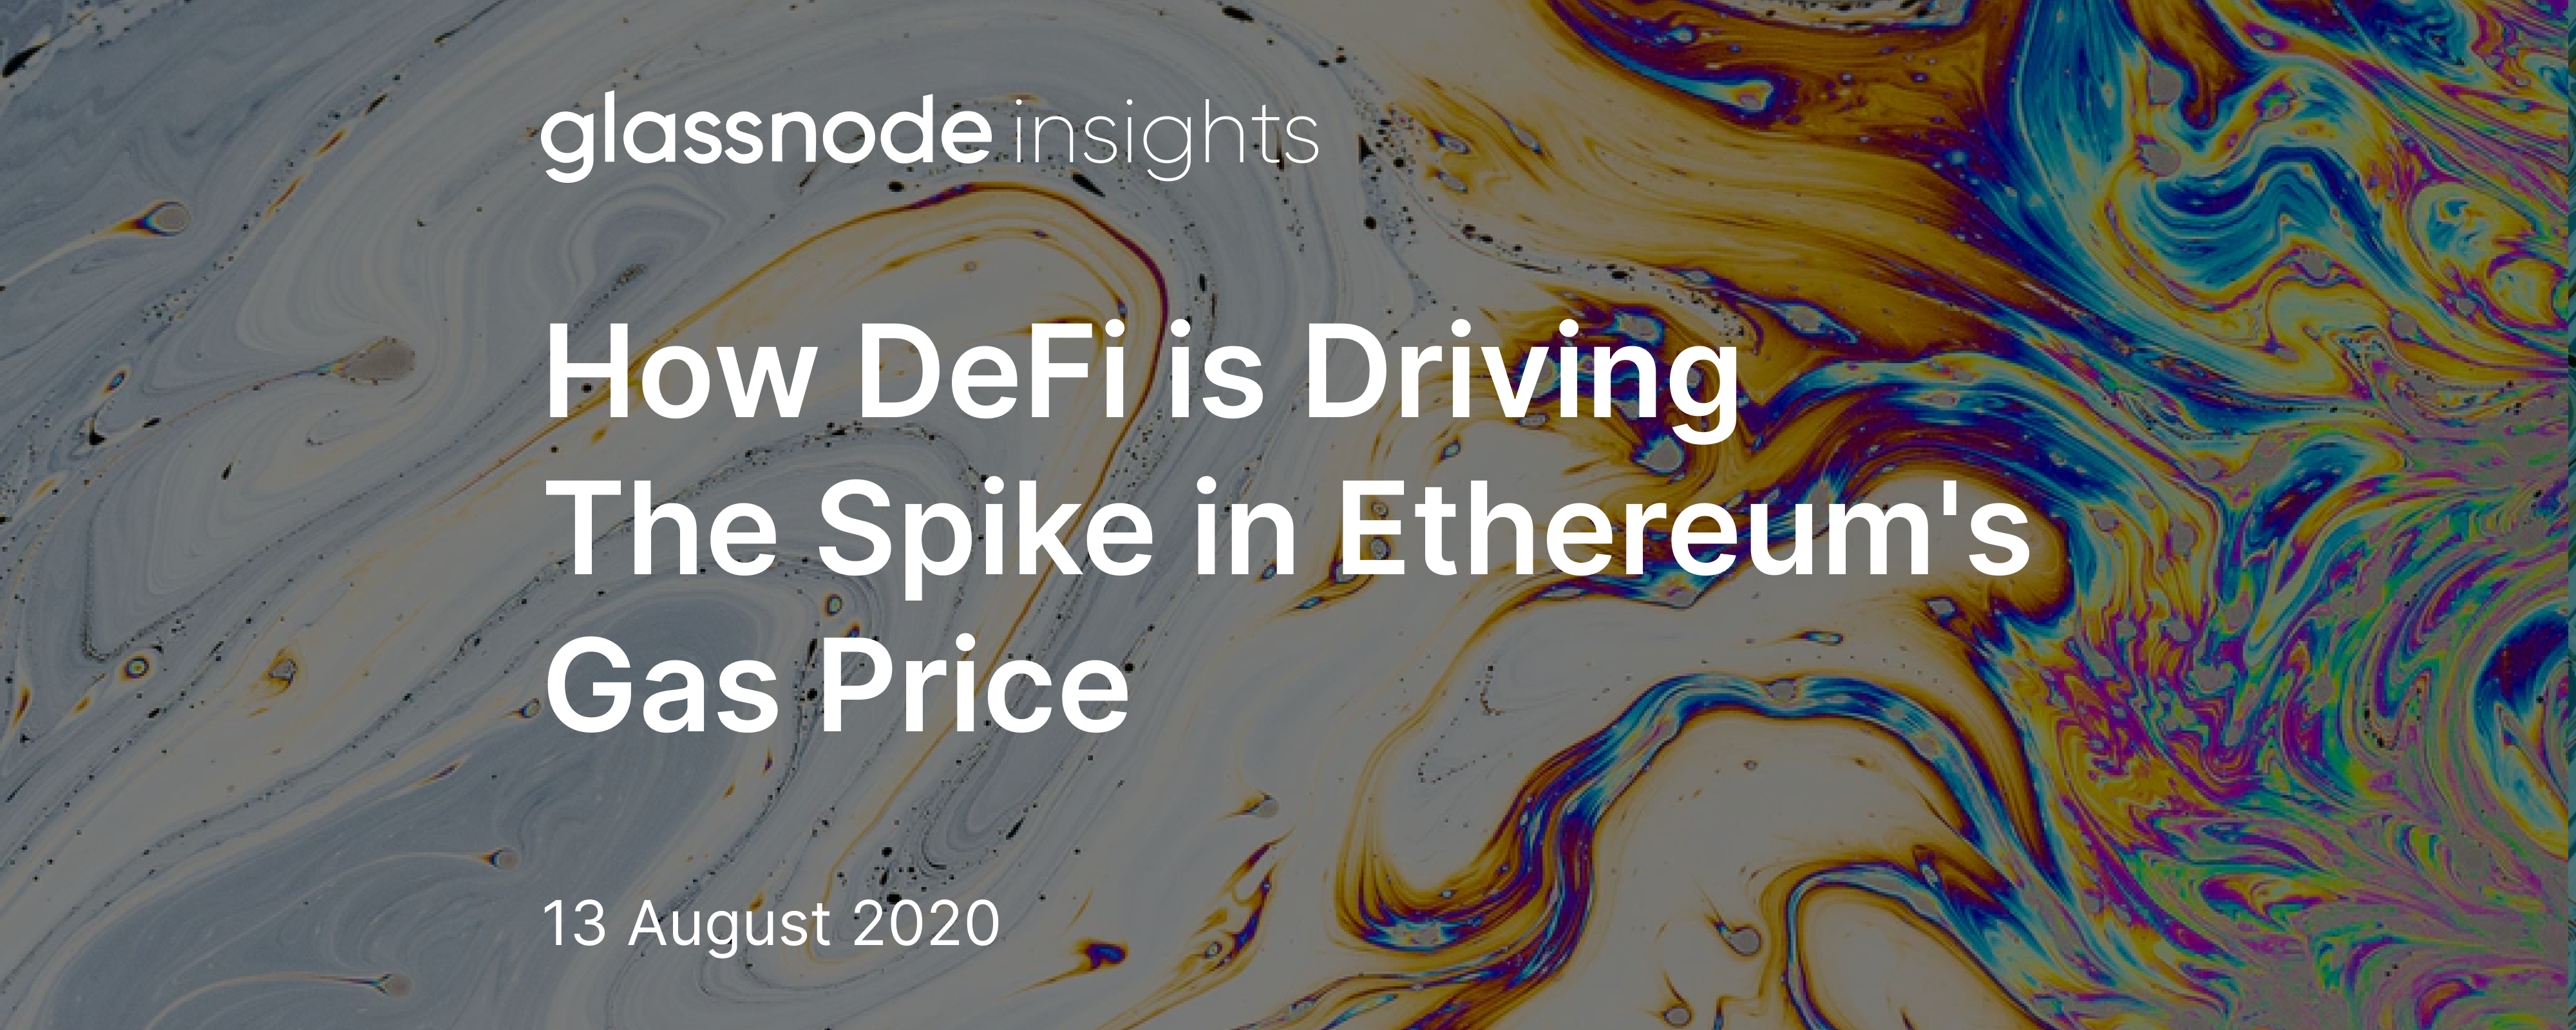 How DeFi is Driving The Spike in Ethereum's Gas Price